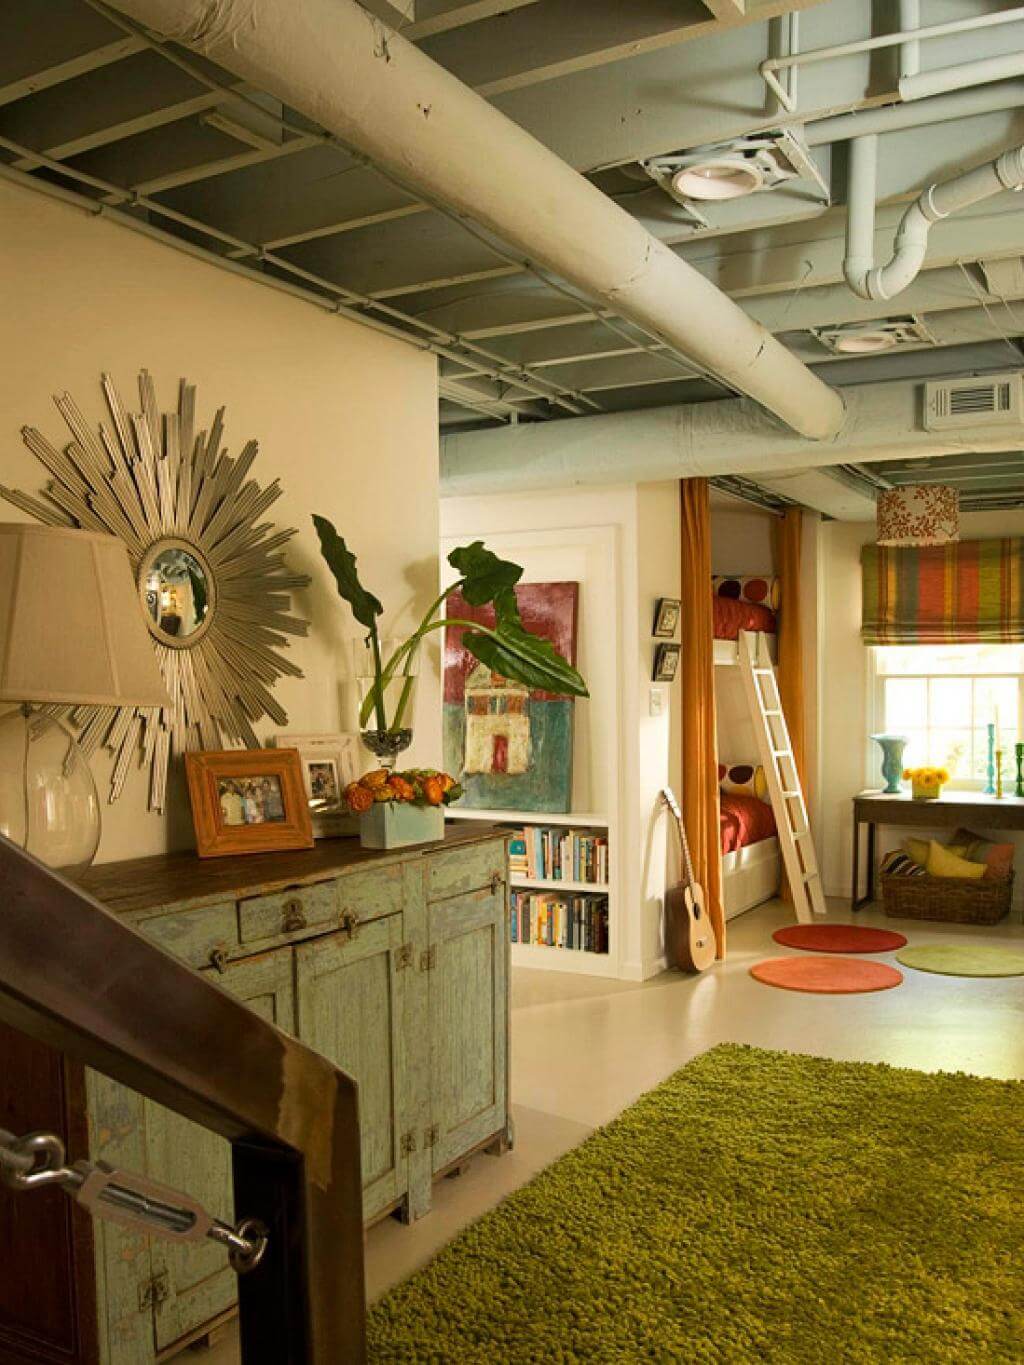 low basement ceiling ideas - 23. Let The Ceiling Shows its Industrial Vibe - Harptimes.com